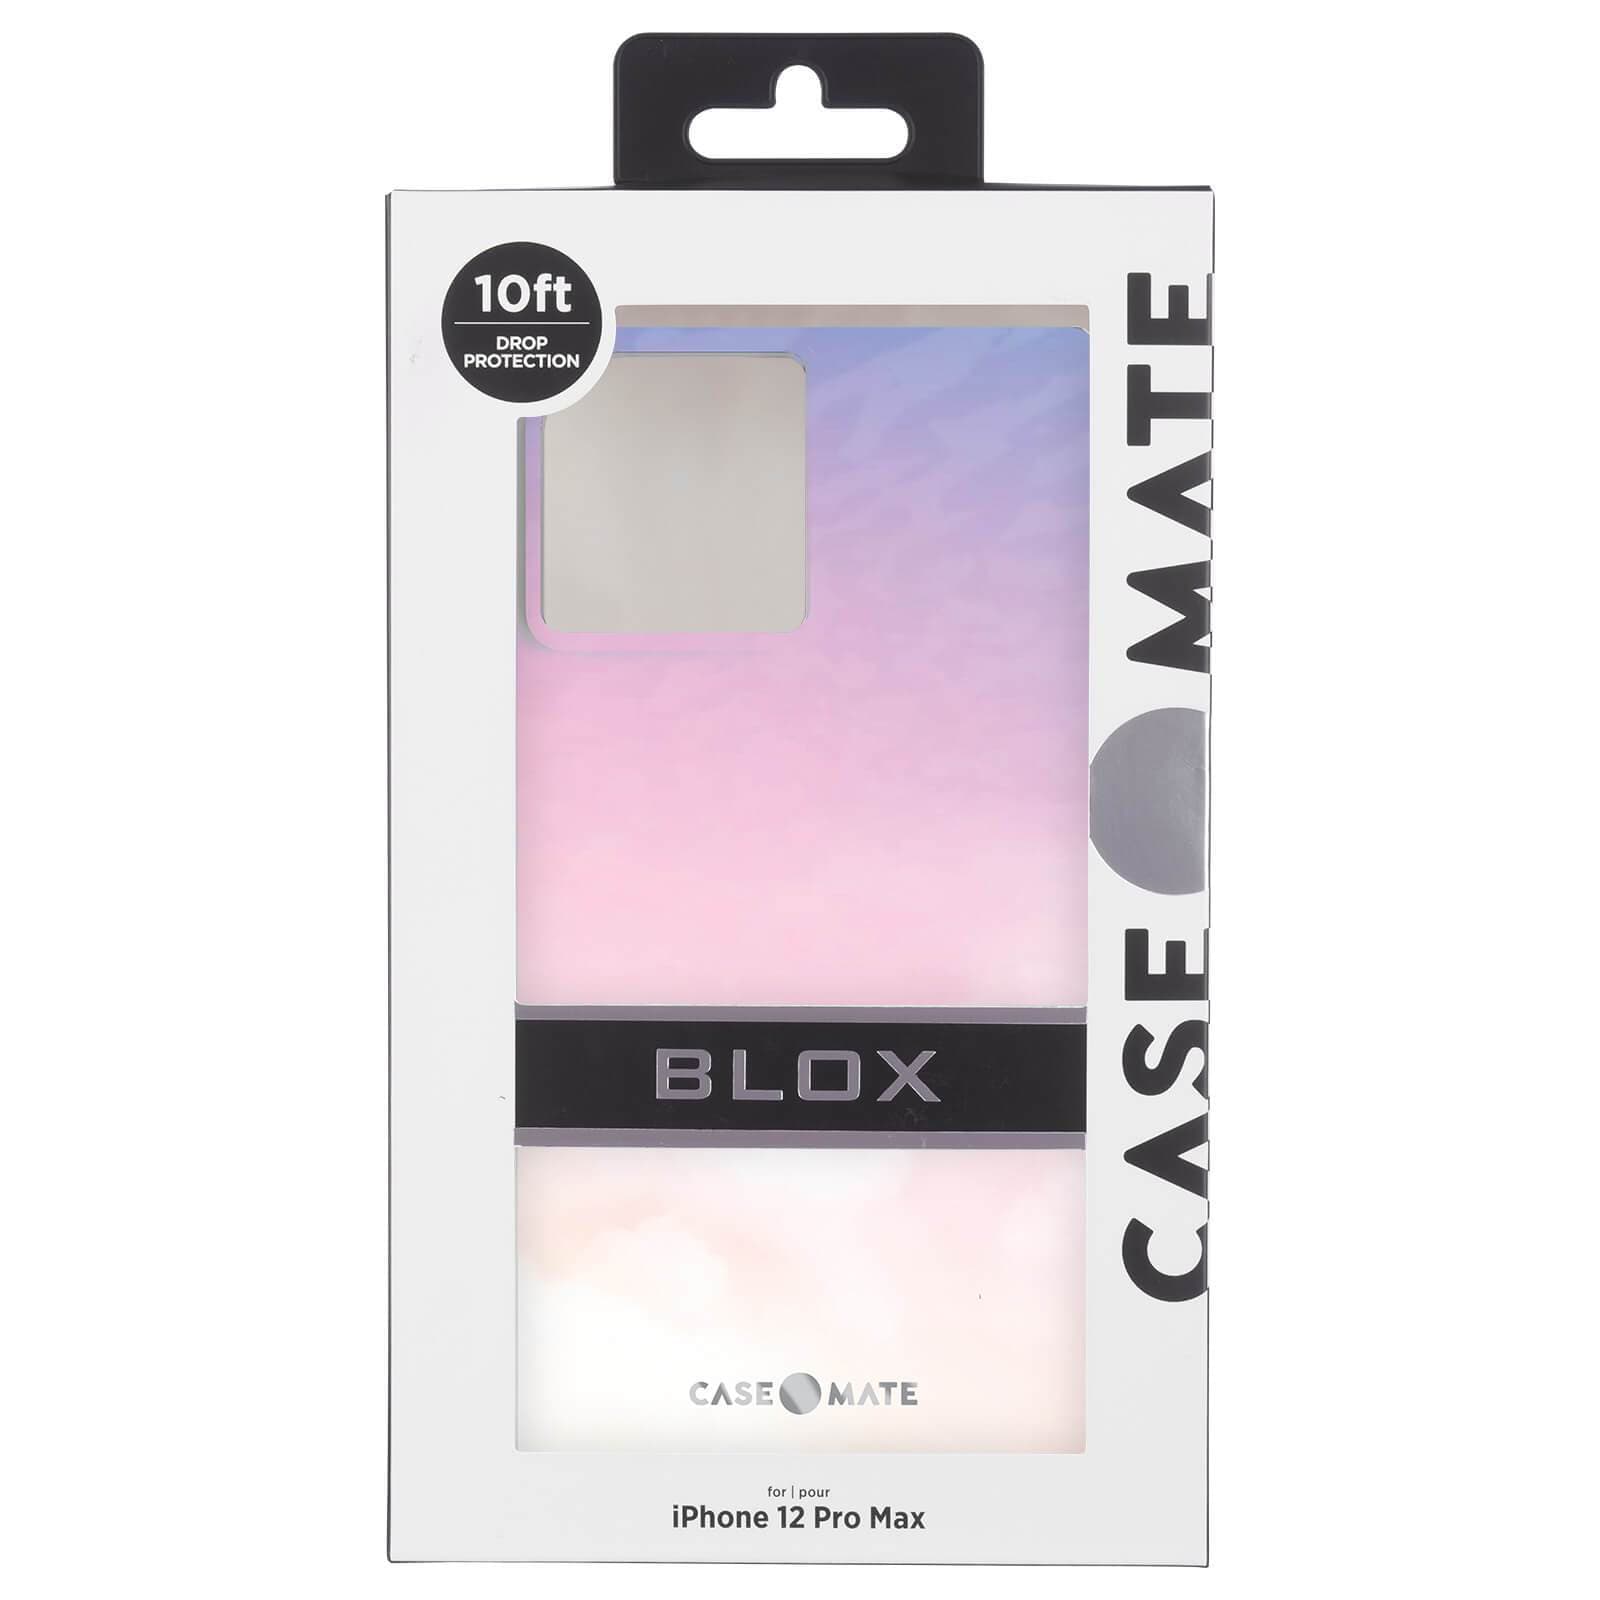 BLOX packaging. 10 ft Drop Protection. Case-Mate BLOX for iPhone 12 Pro. color::Clouds